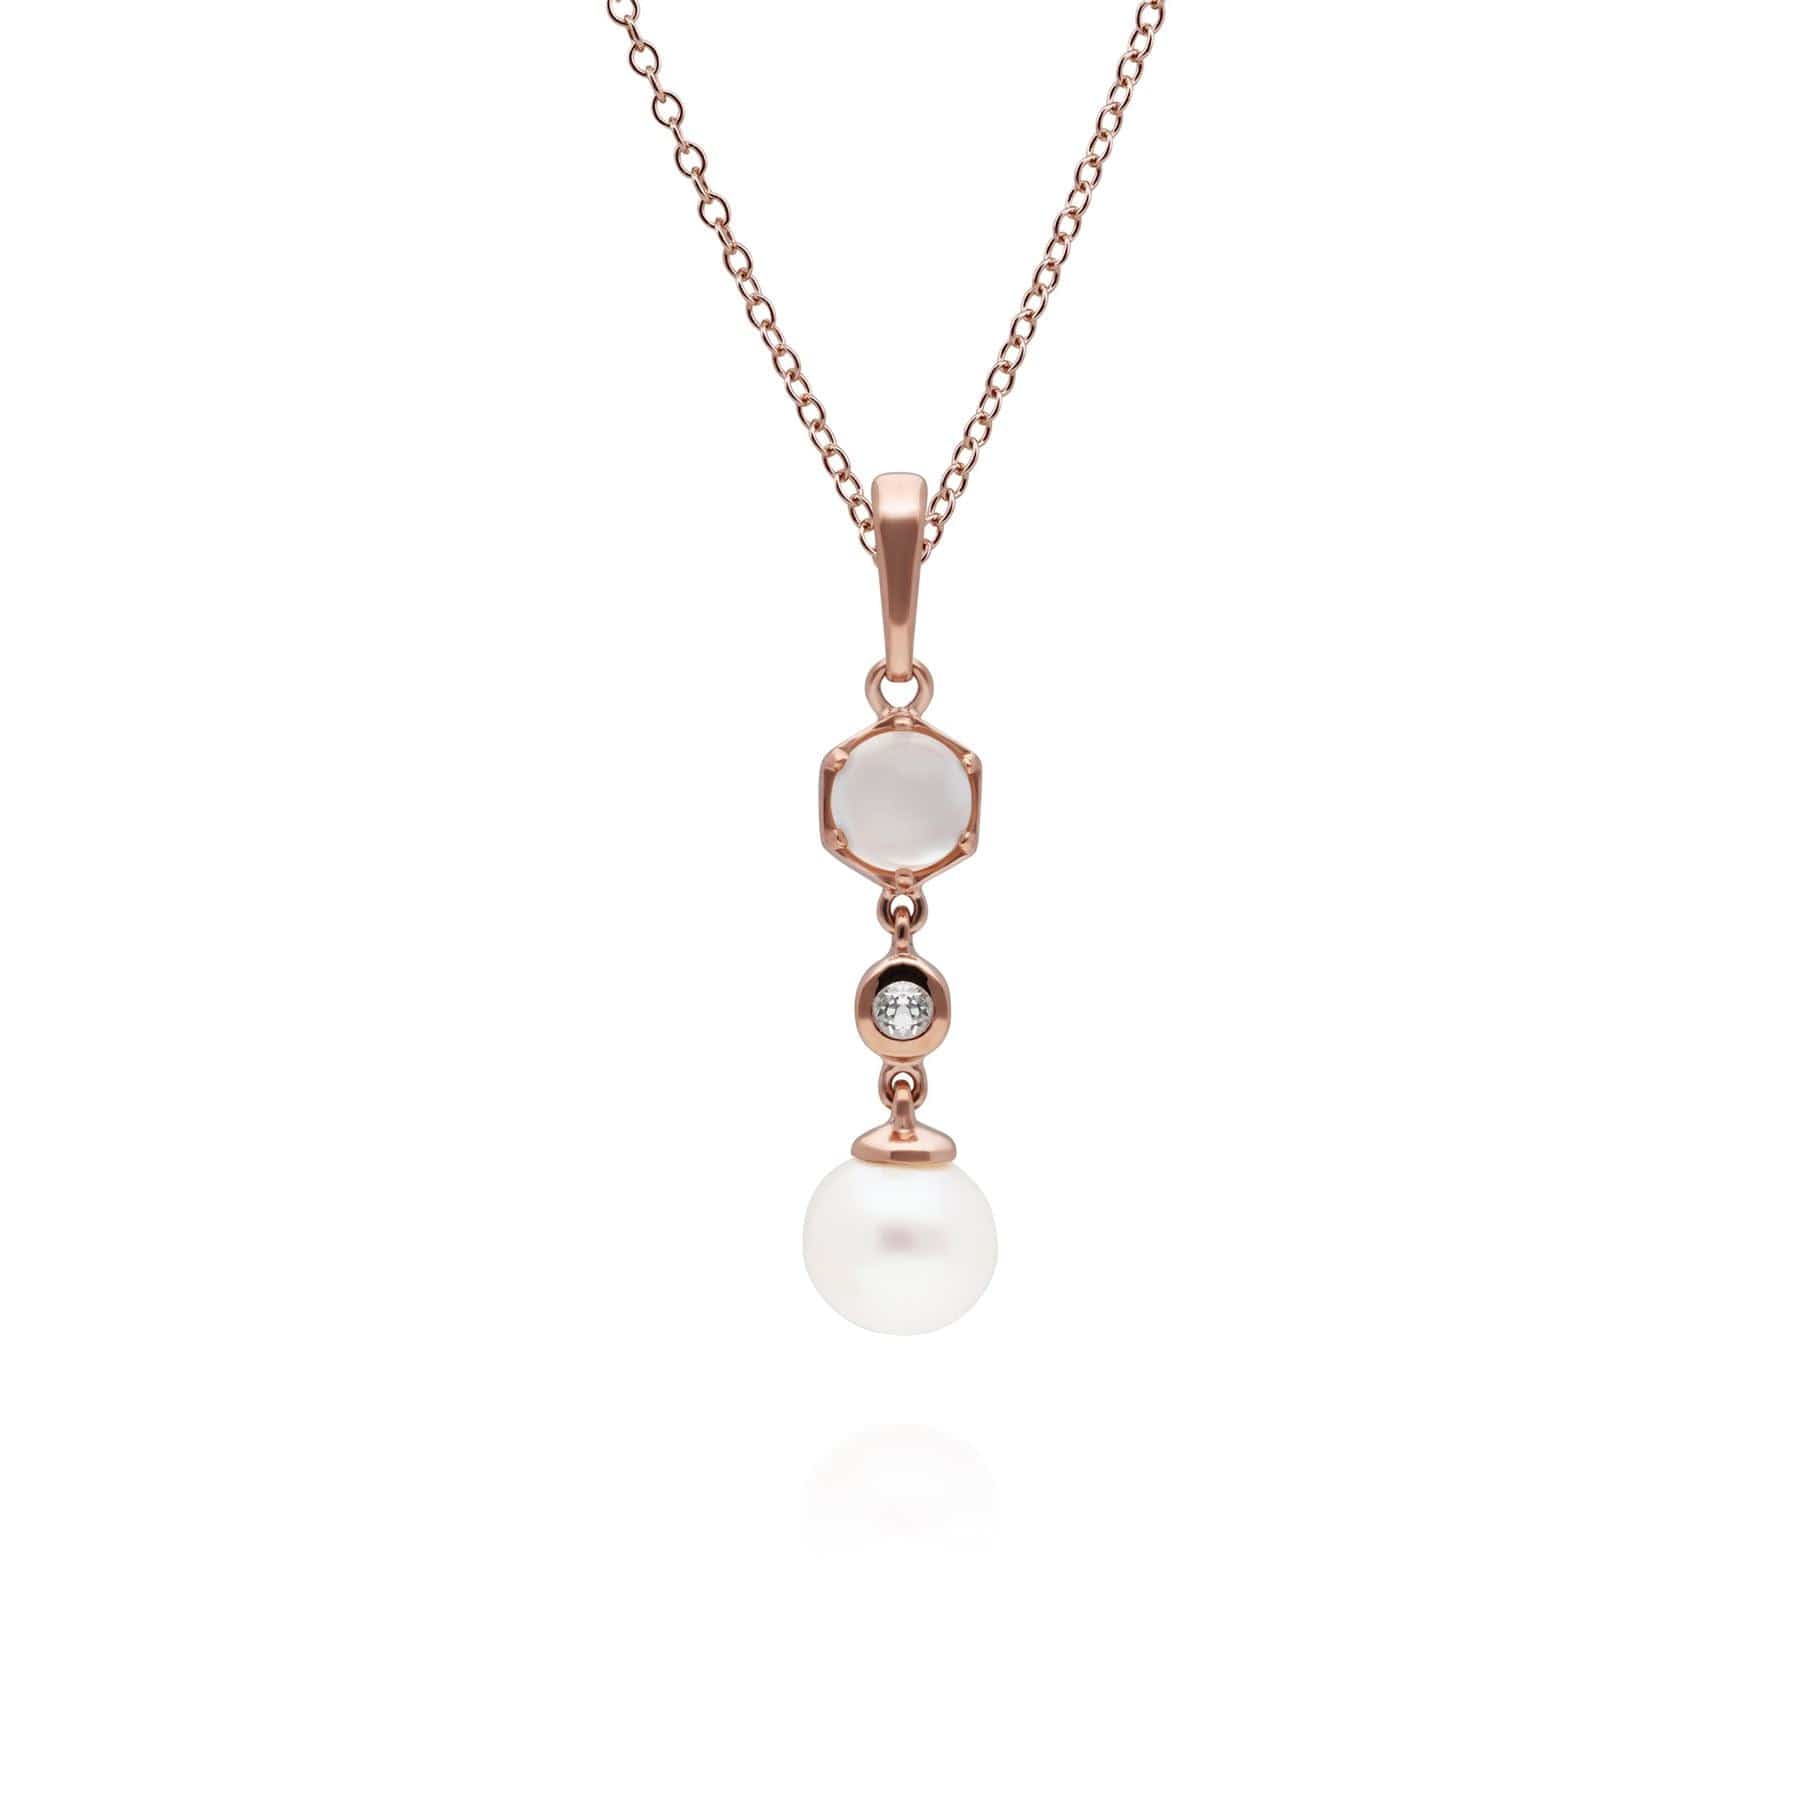 Photos - Pendant / Choker Necklace Modern Pearl, Moonstone & Topaz Drop Pendant in Rose Gold Plated Silver